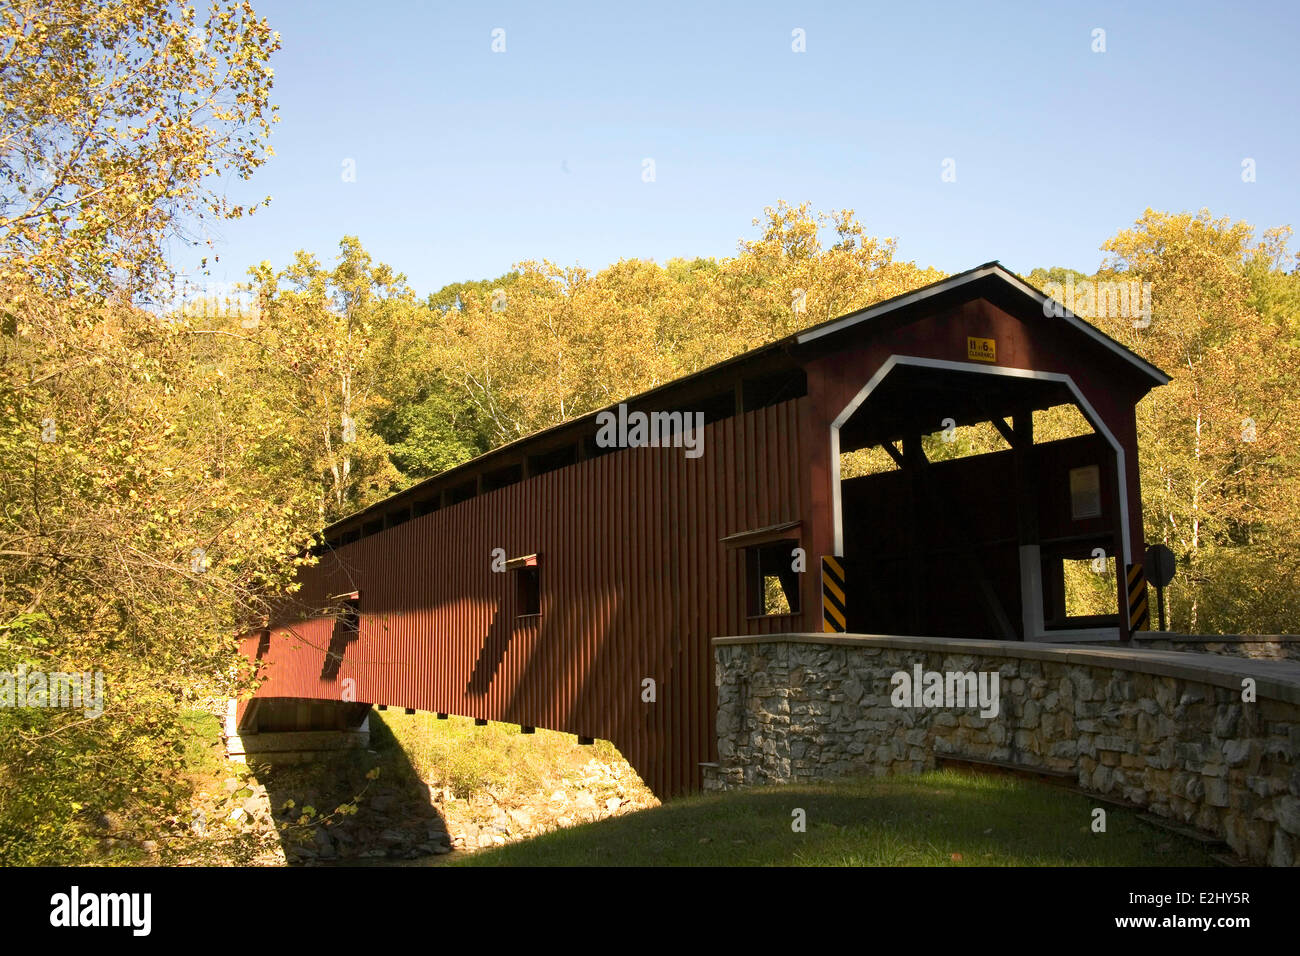 Colemanville Covered Bridge in the Pennsylvania Dutch Countryside of Lancaster County surrounded by fall foliage. Stock Photo